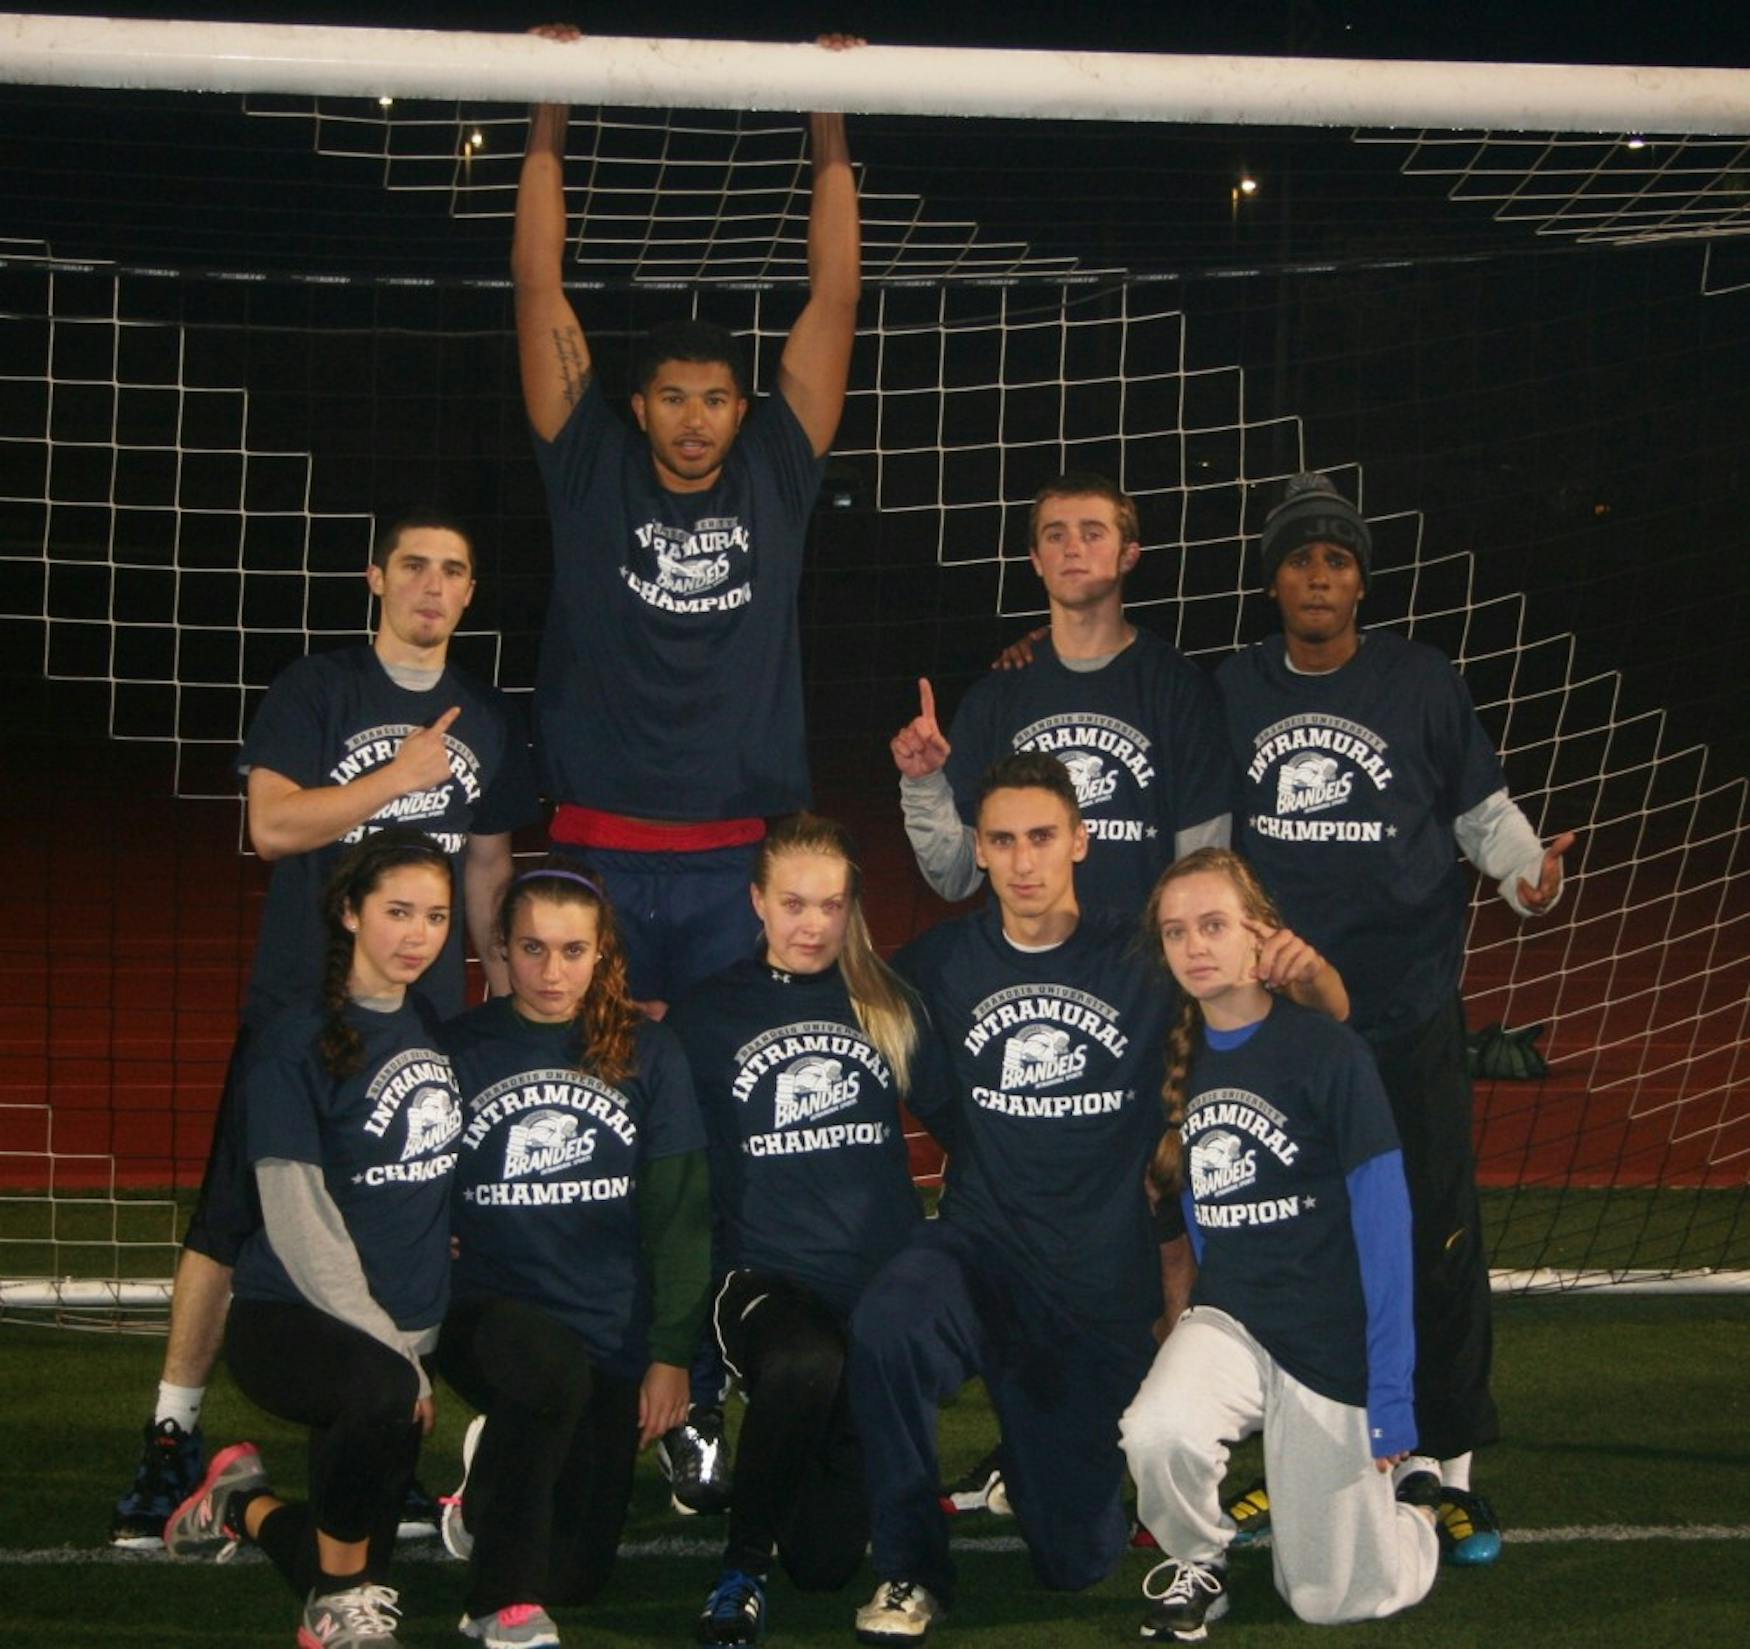 VICTORY FORMATION: Members of Team Colby pose for a photograph after their win in the coed intramural outdoor soocer final.